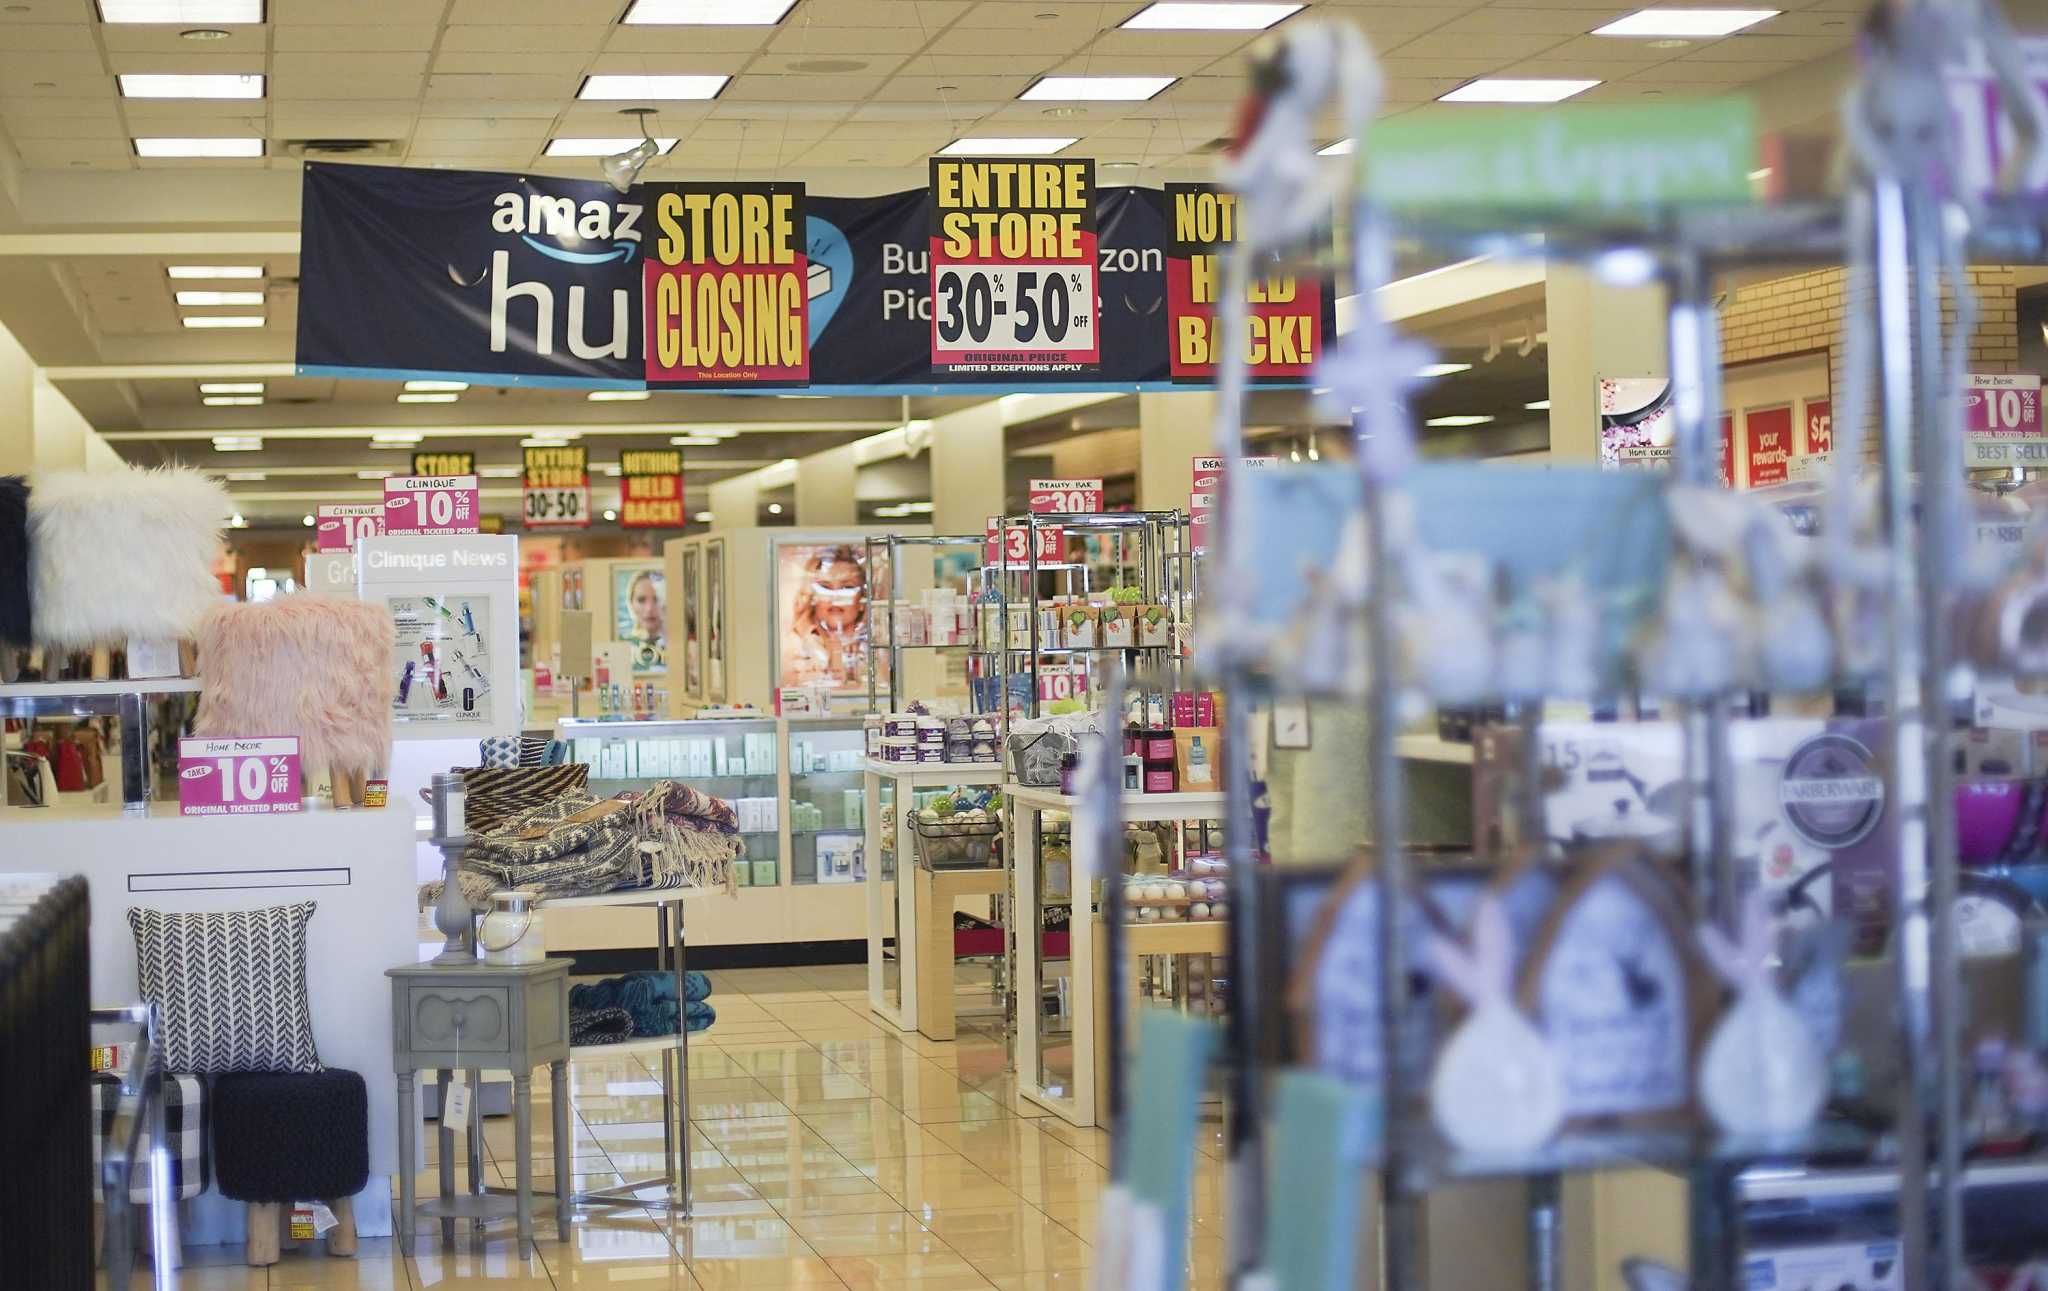 Bealls Buys a Stage Stores DC and IP for $7 Million - Retail TouchPoints